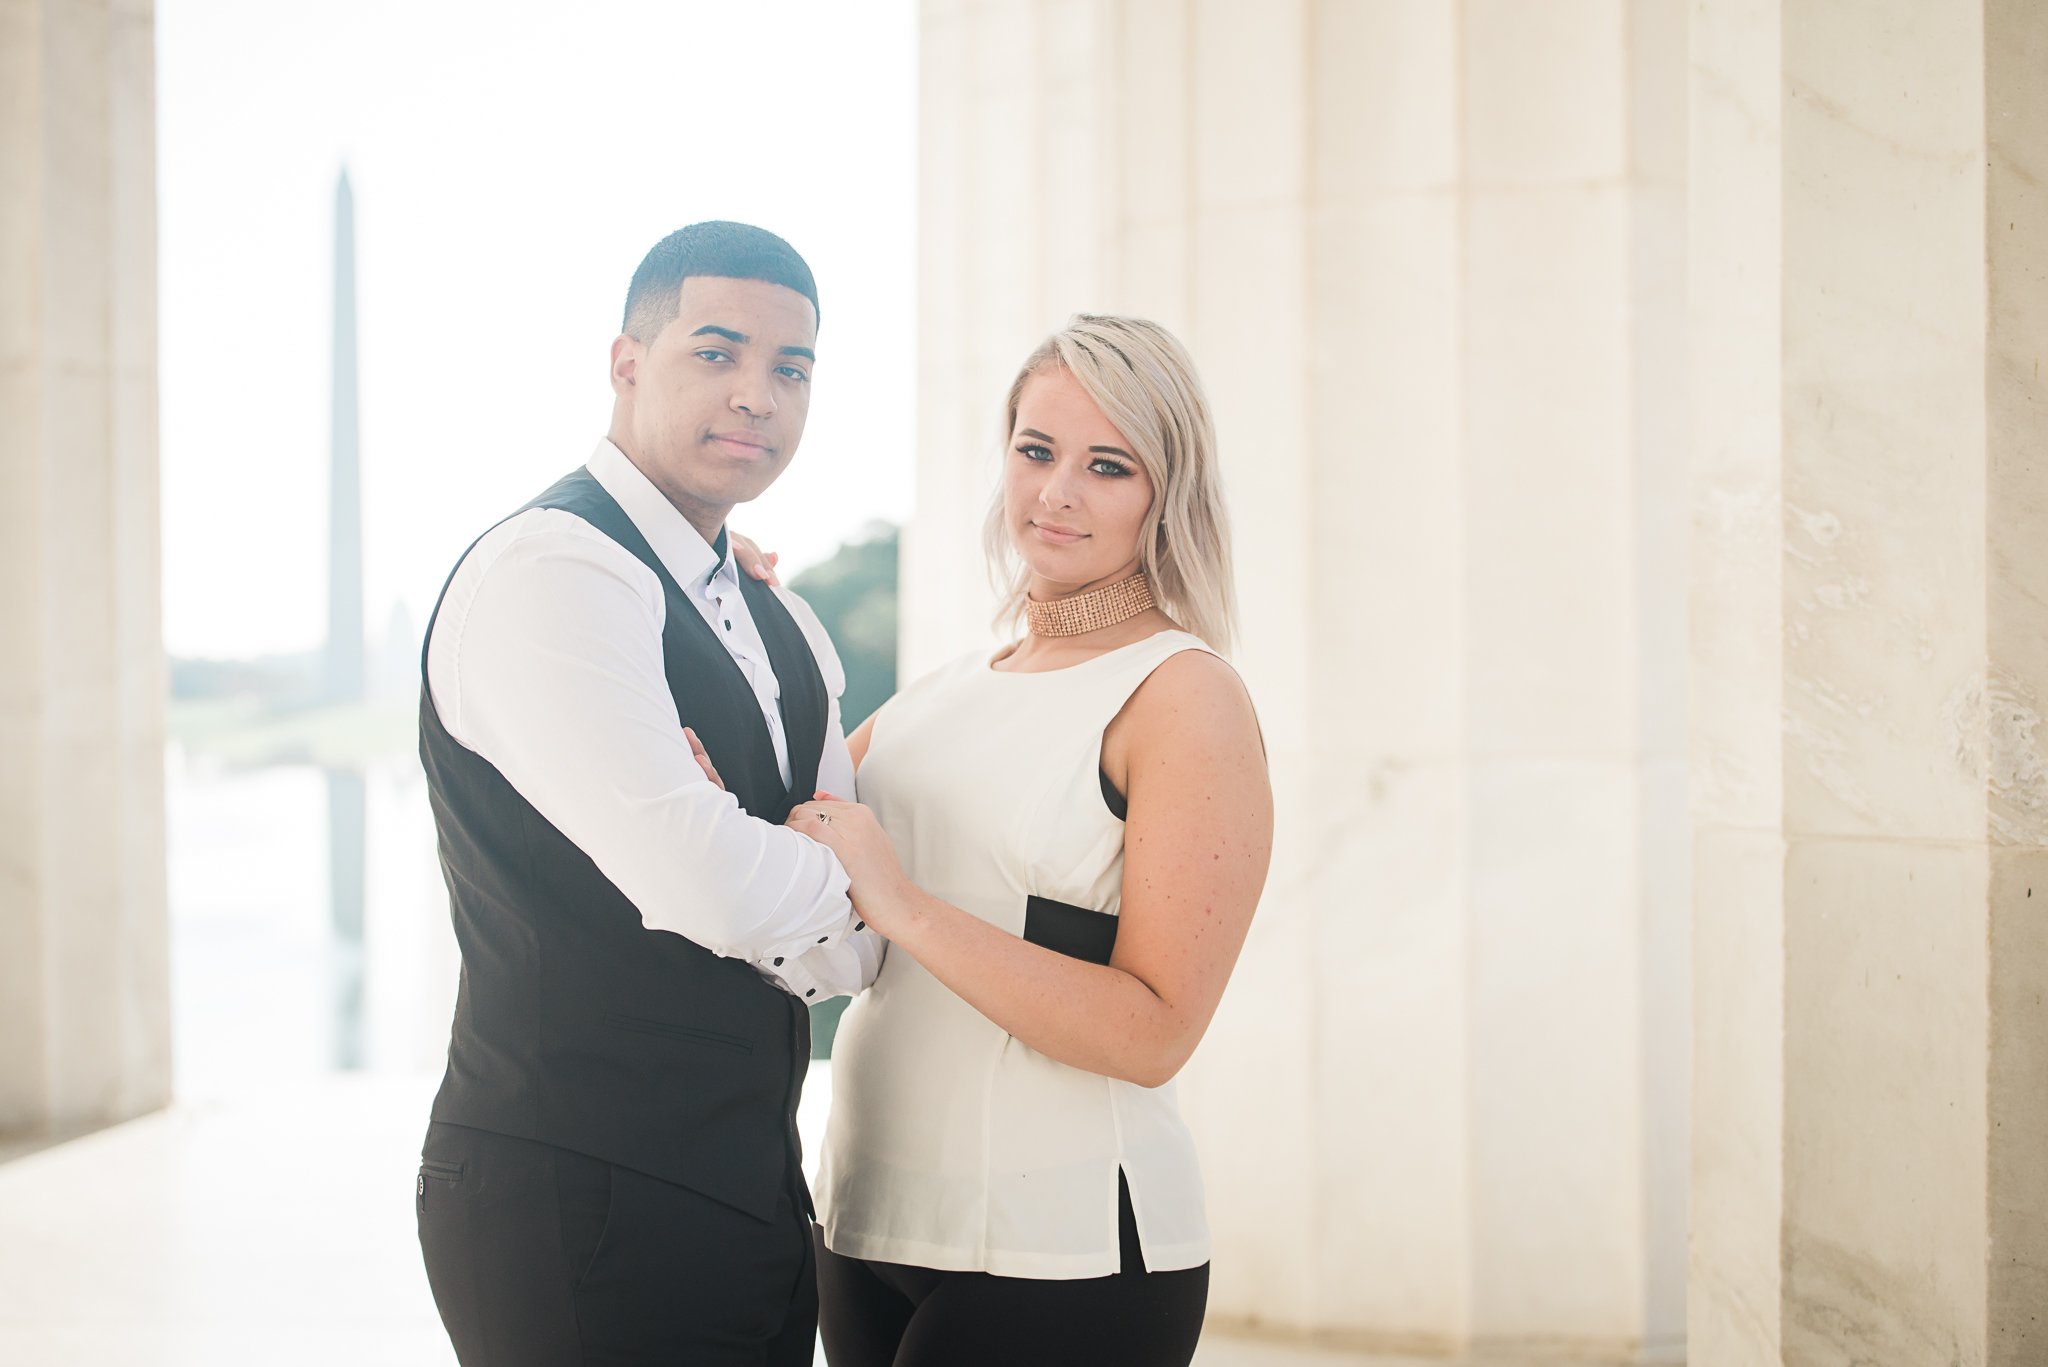 Engagement photography at Lincoln Memorial.